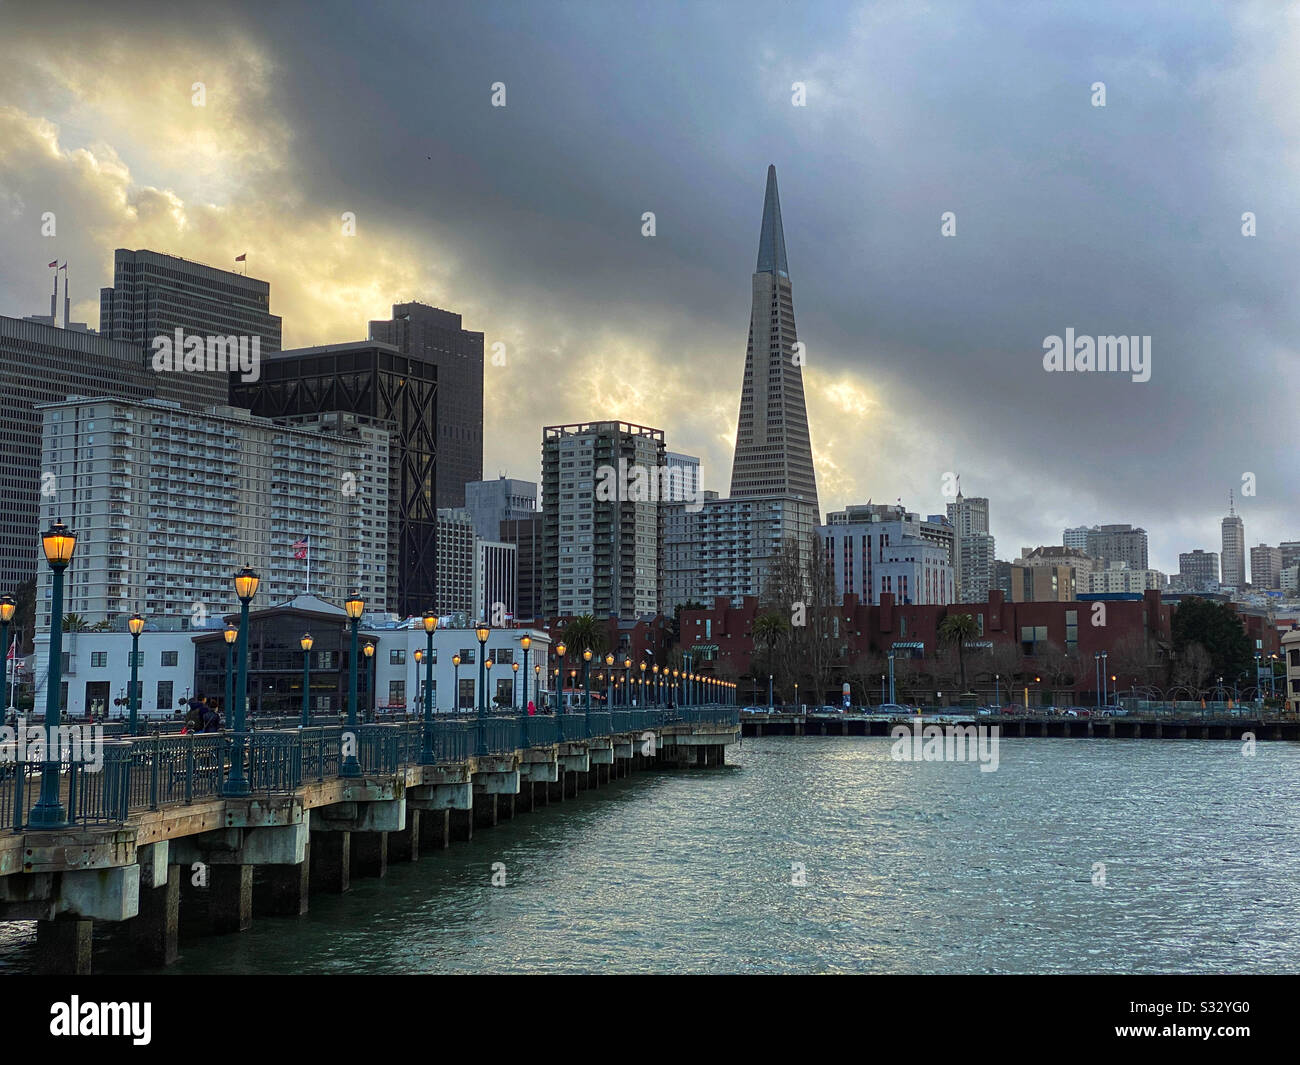 San Francisco skyline with the Transamerica Pyramid building against a dramatic sunset Stock Photo